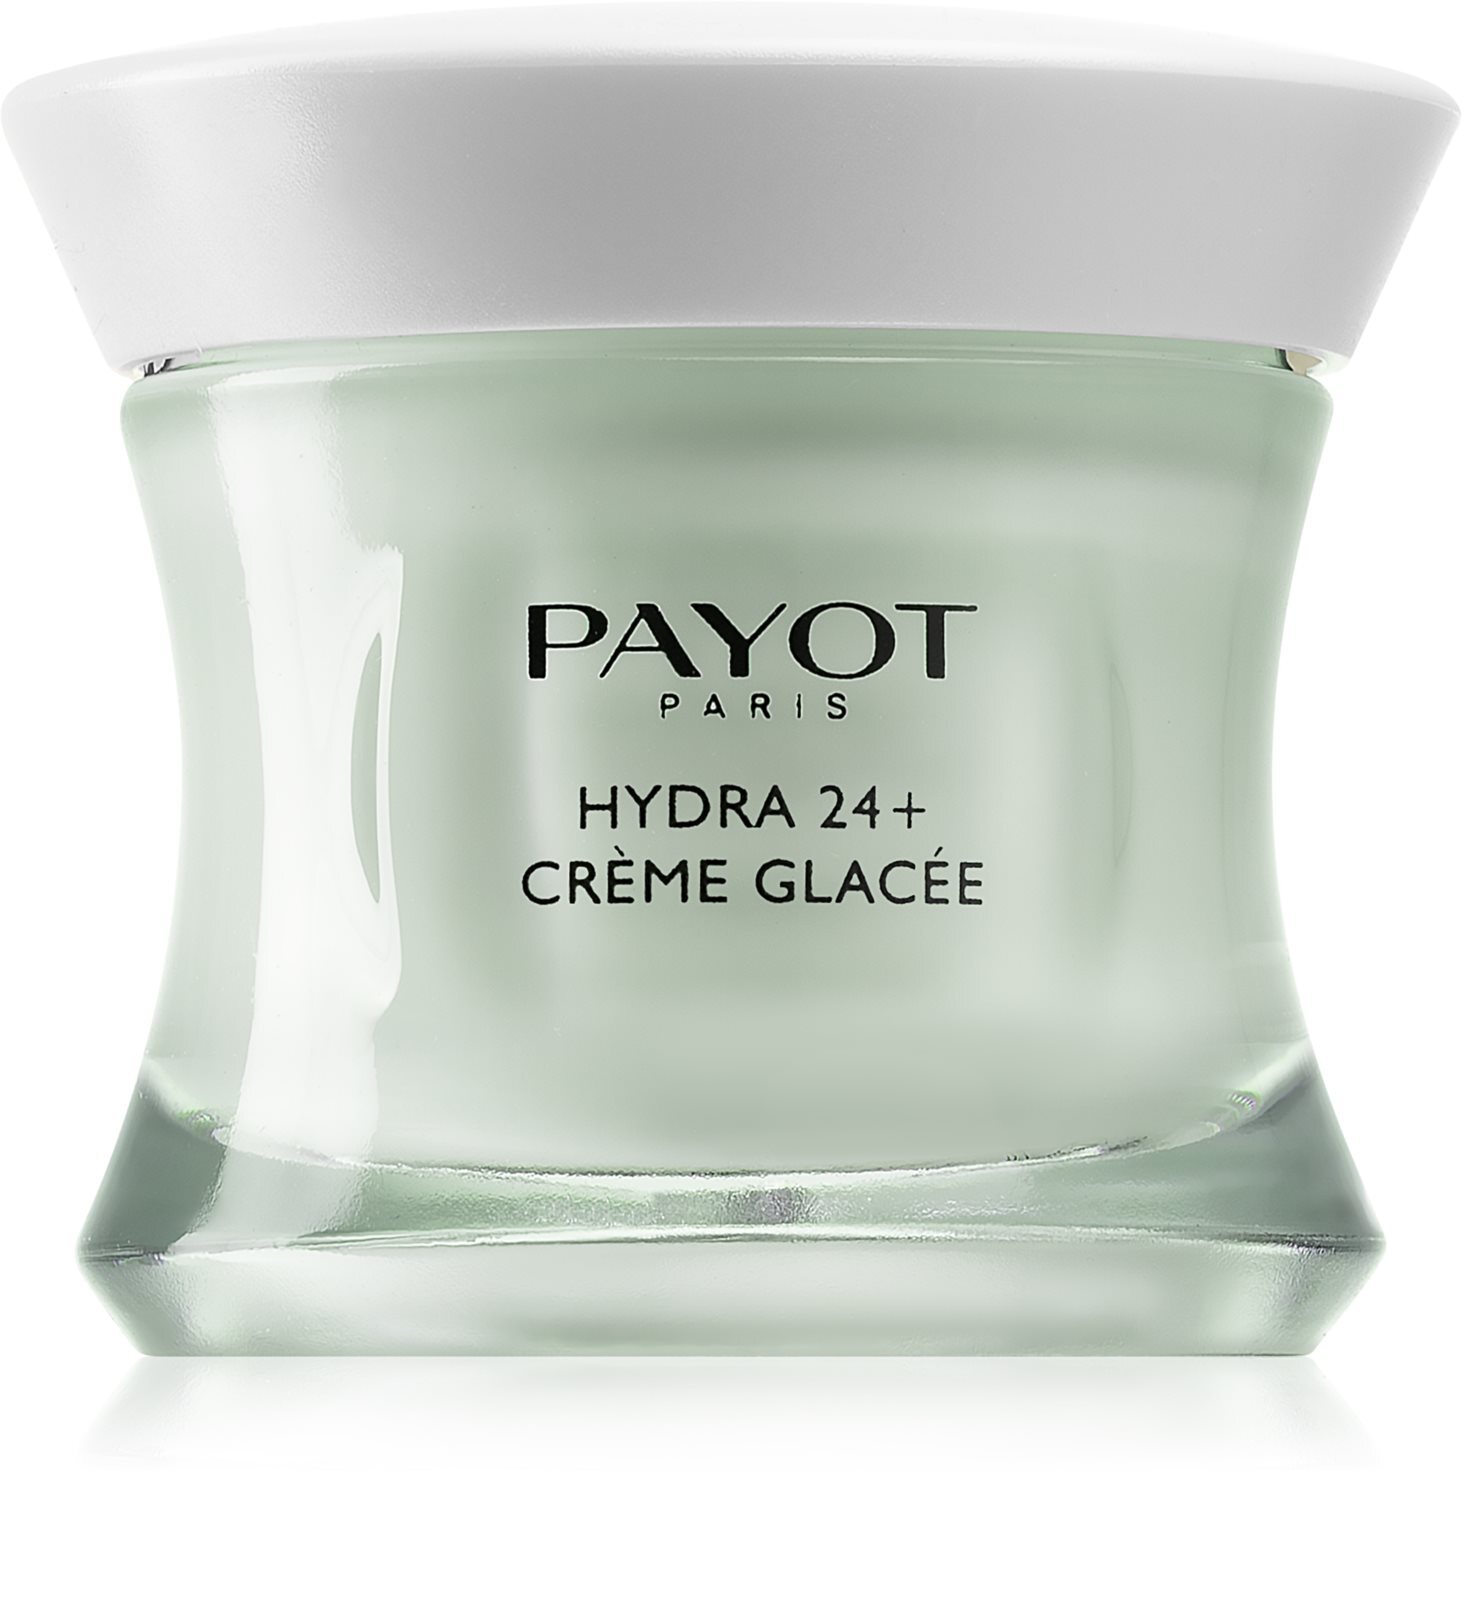 Payot gel. Payot hydra 24+. Payot pate Grise jour 15 мл. Payot 24 hydra Creme. Крем Пайот jour gele.